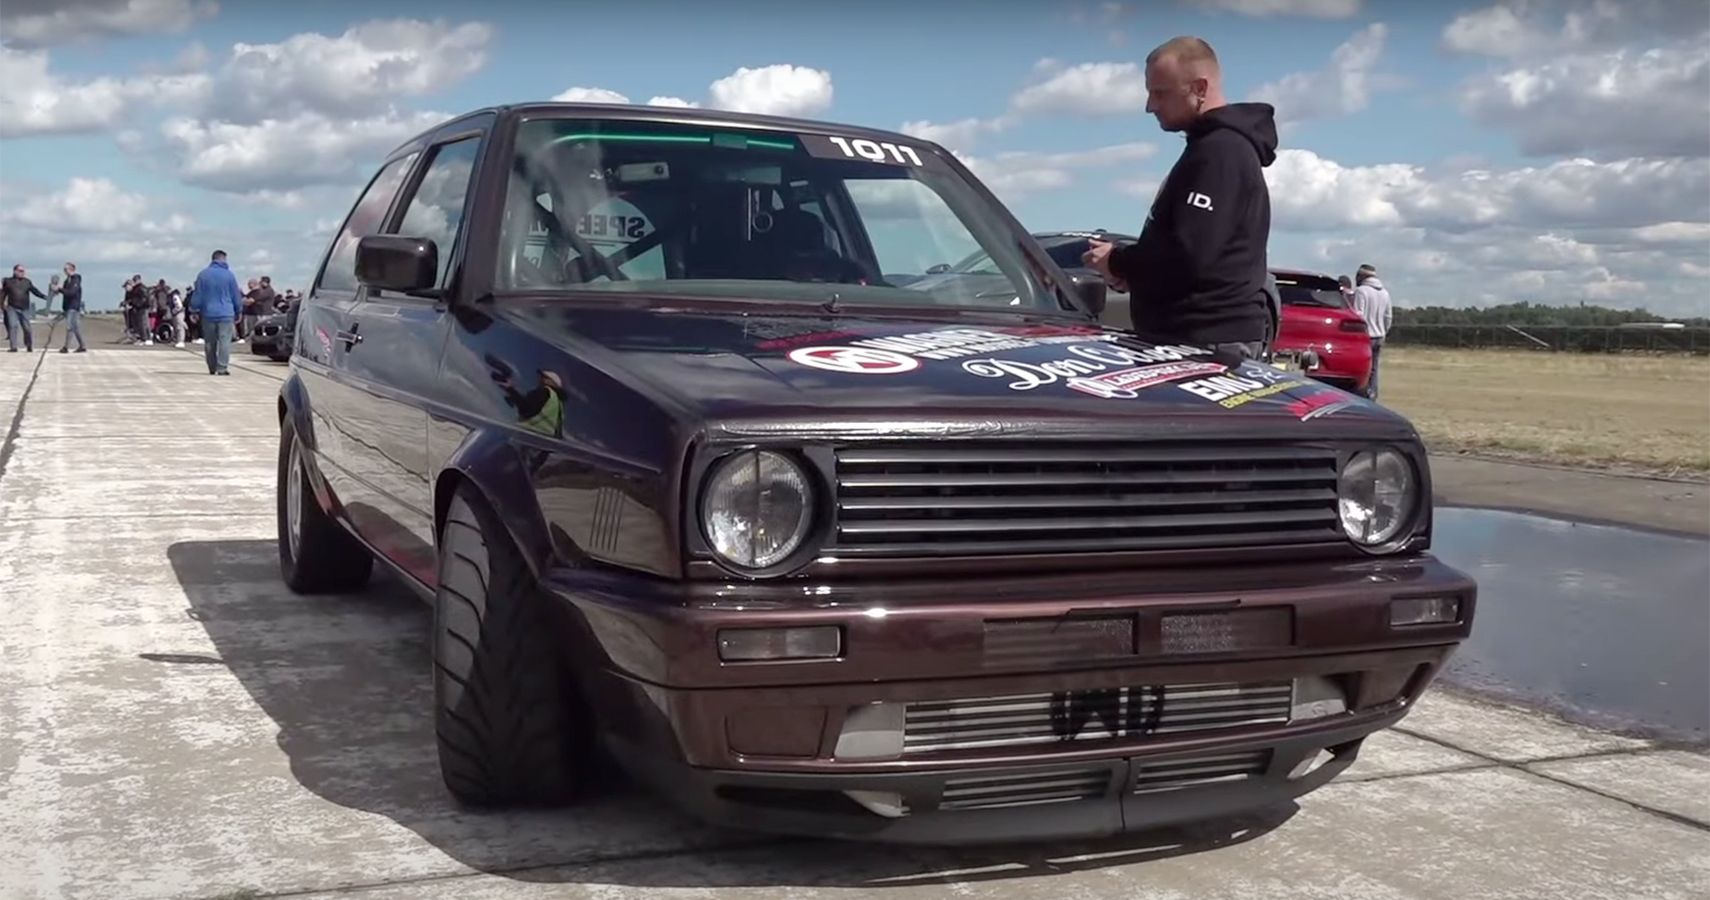 World's fastest Golf 2 has over 1 000 kW and AWD